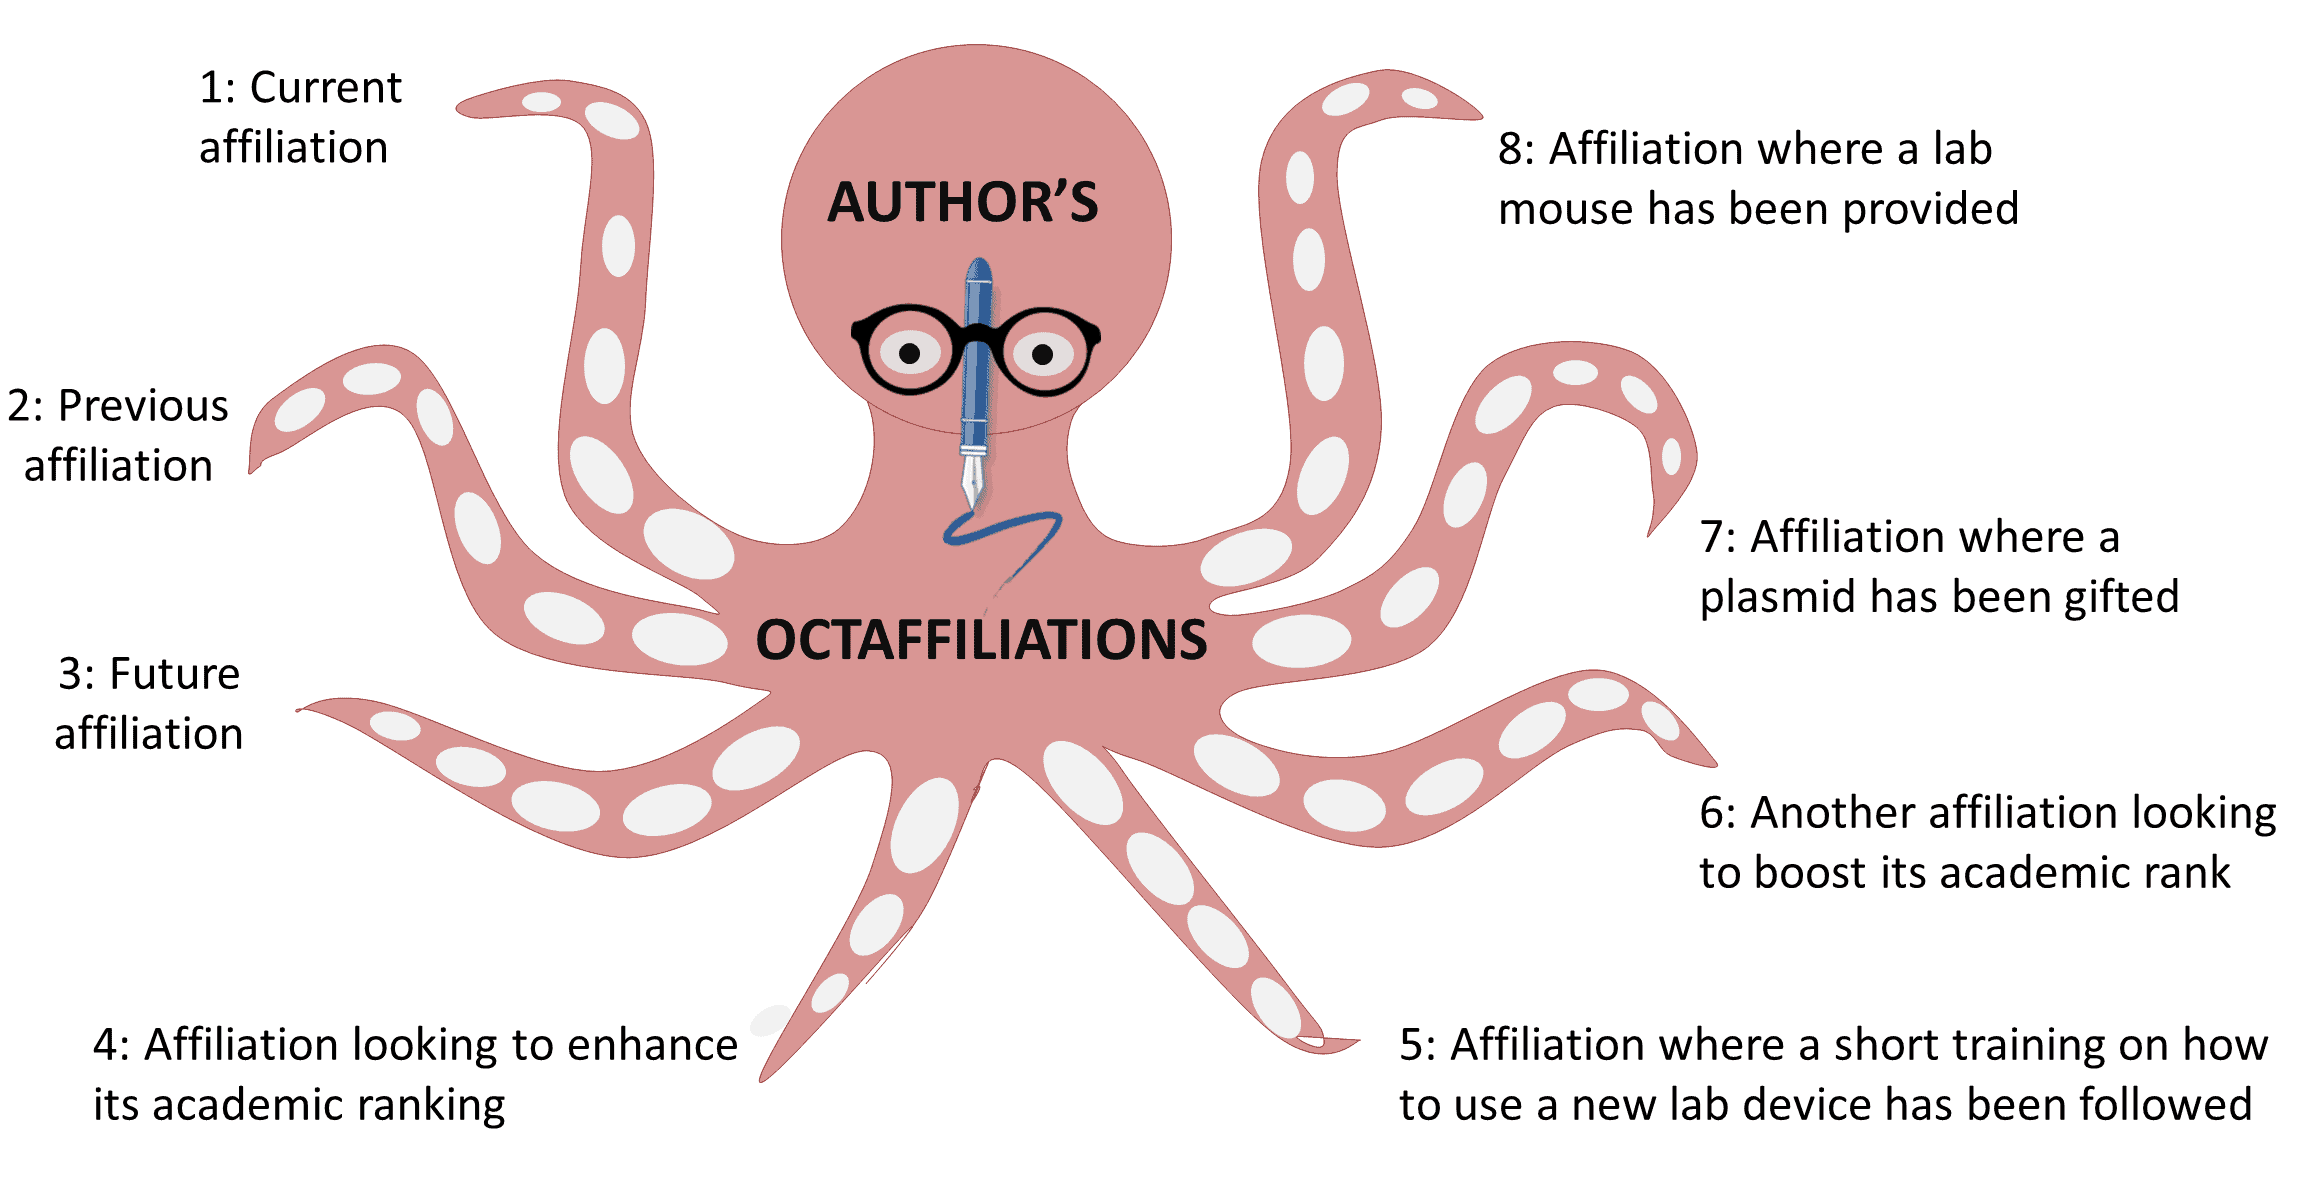 Octopus showing the different types of affiliations that authors use